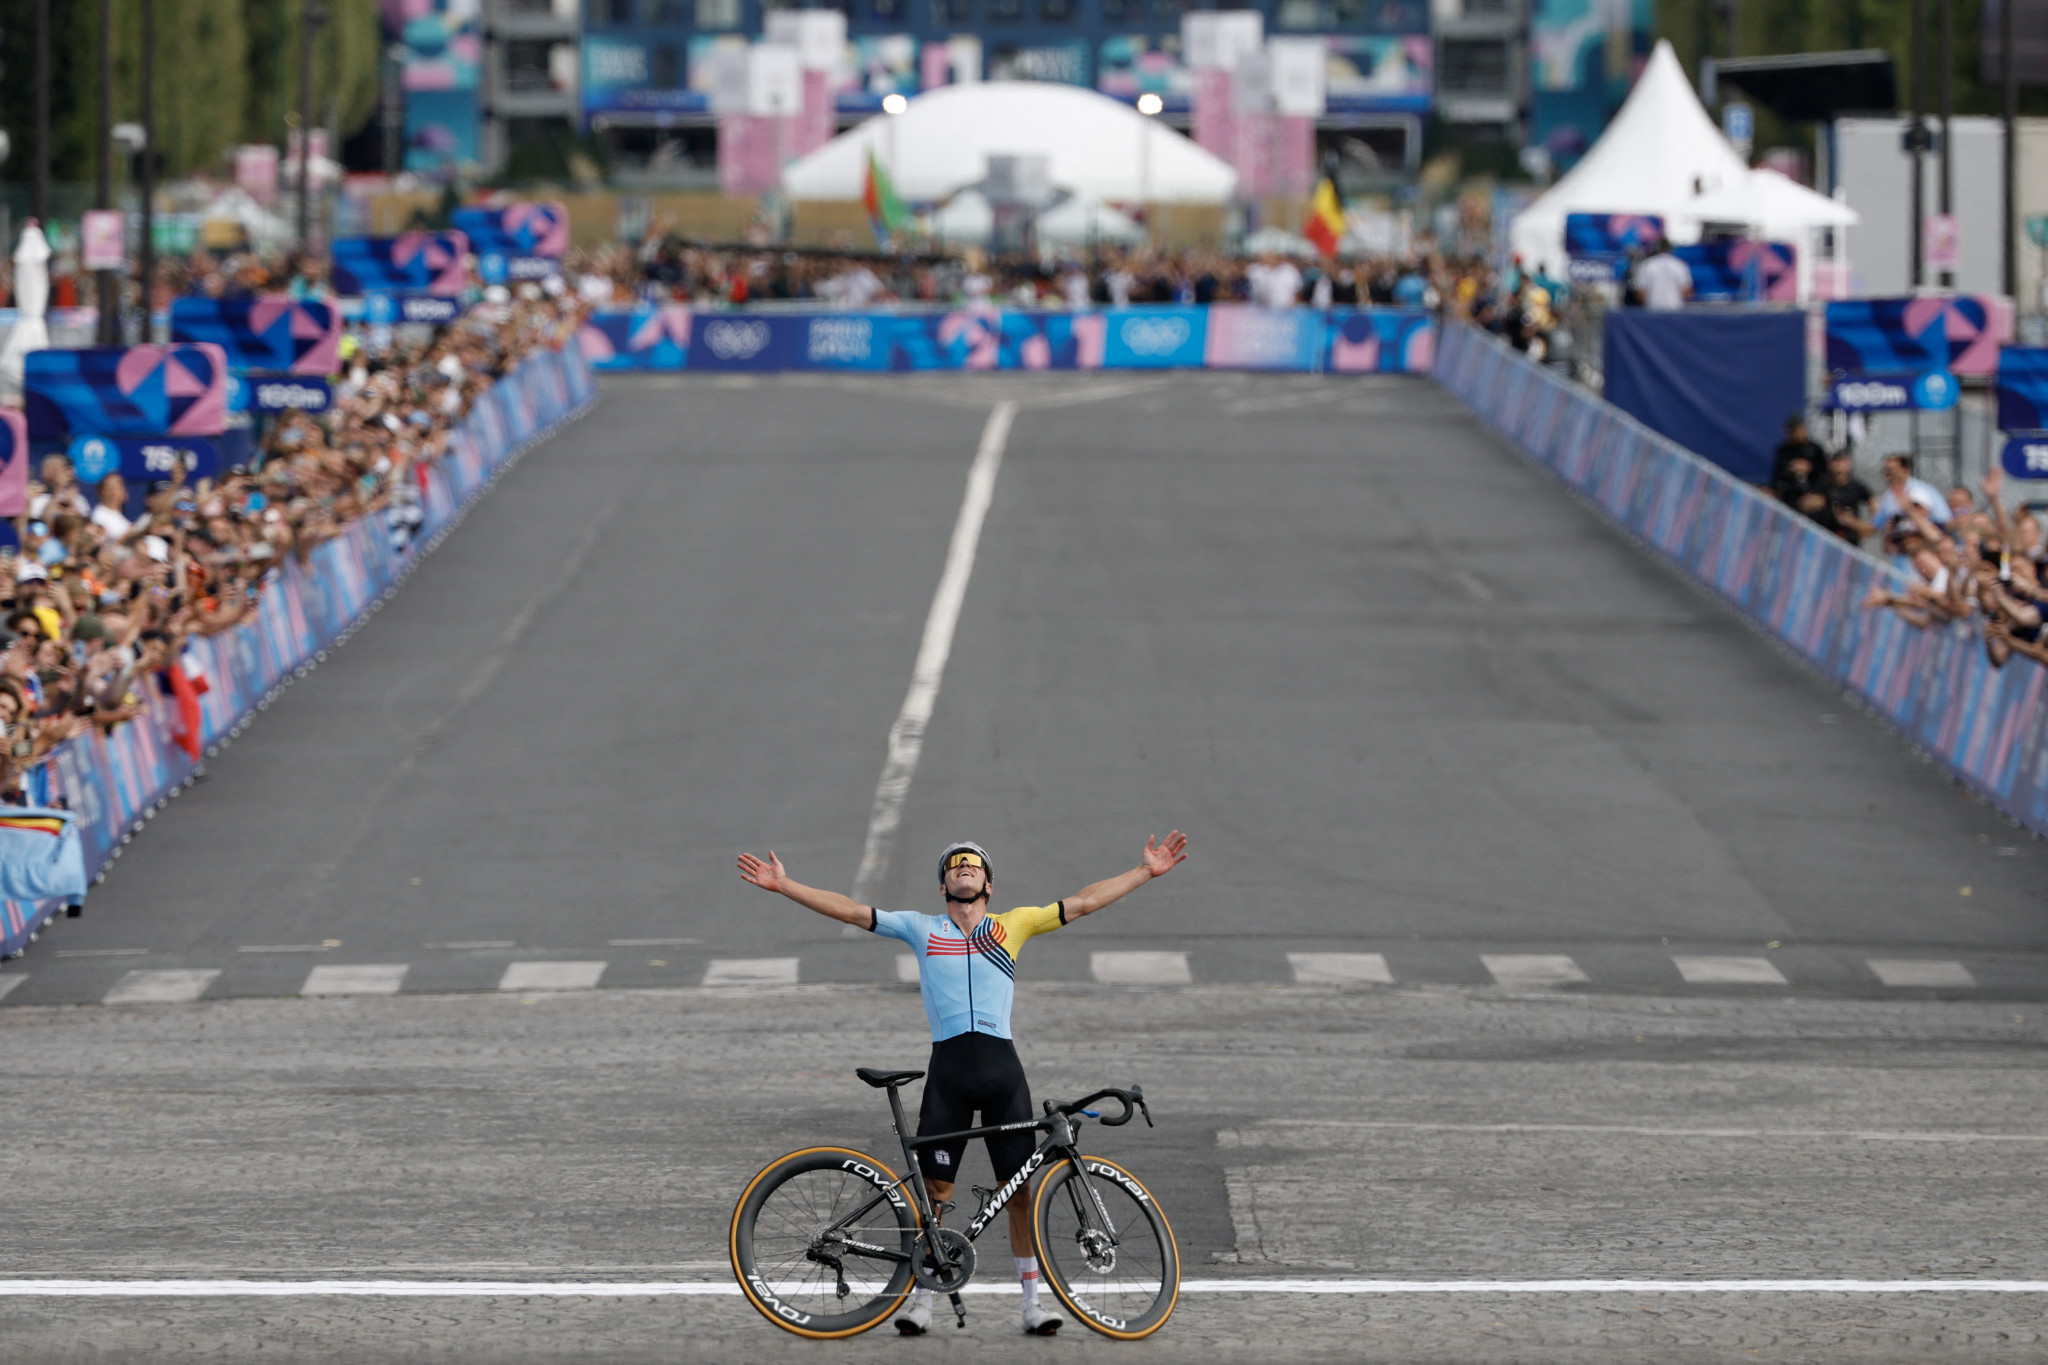 Remco Evenepoel's celebratory photograph has gone down a storm. GETTY IMAGES